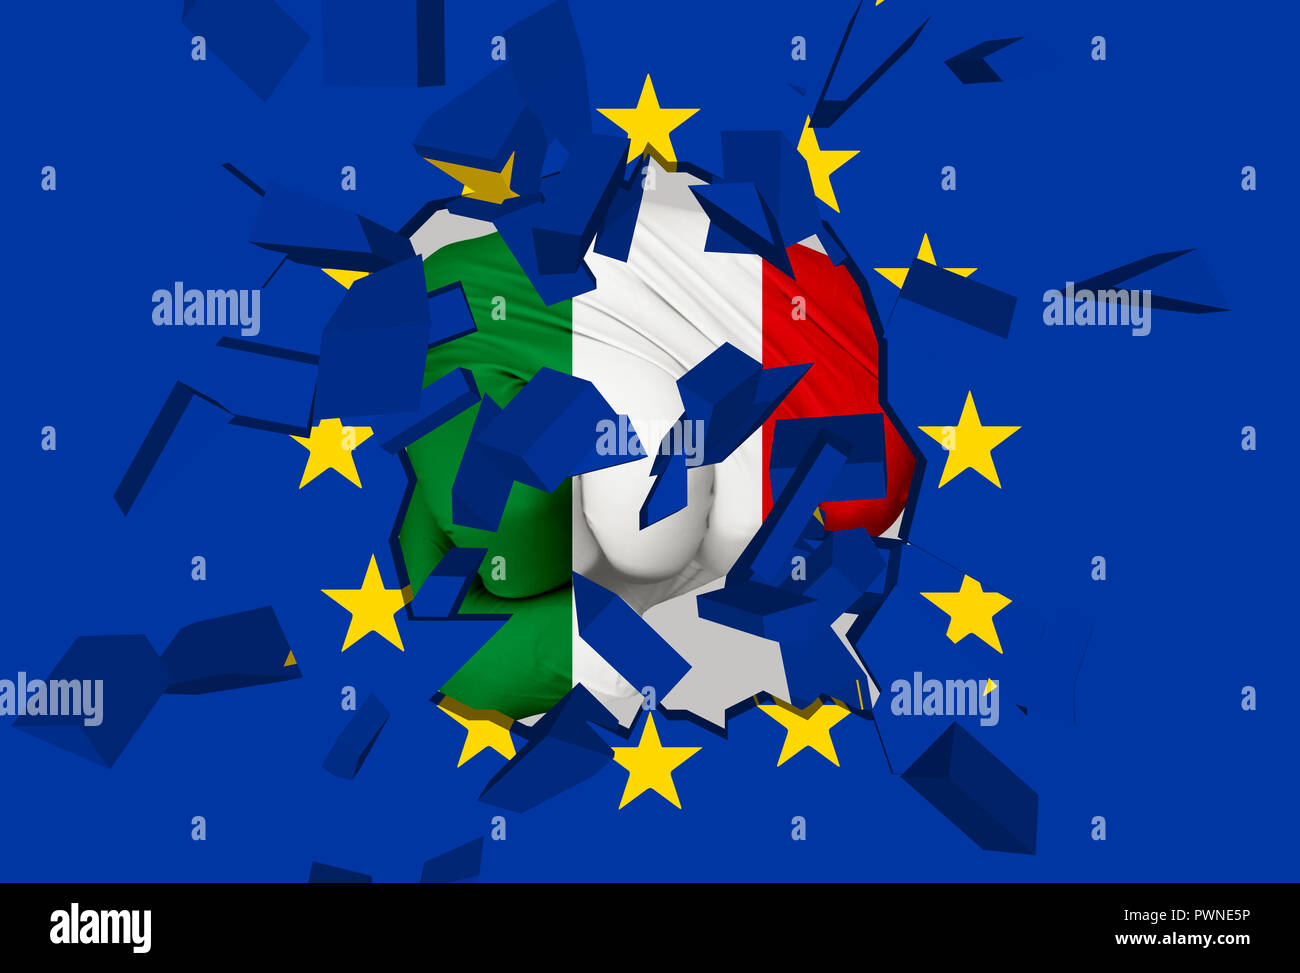 3D illustration: a fist-shaped Italian flag hits and destroys the EU flag. It is an allegorical image of the crisis between EU and Italy followed by t Stock Photo